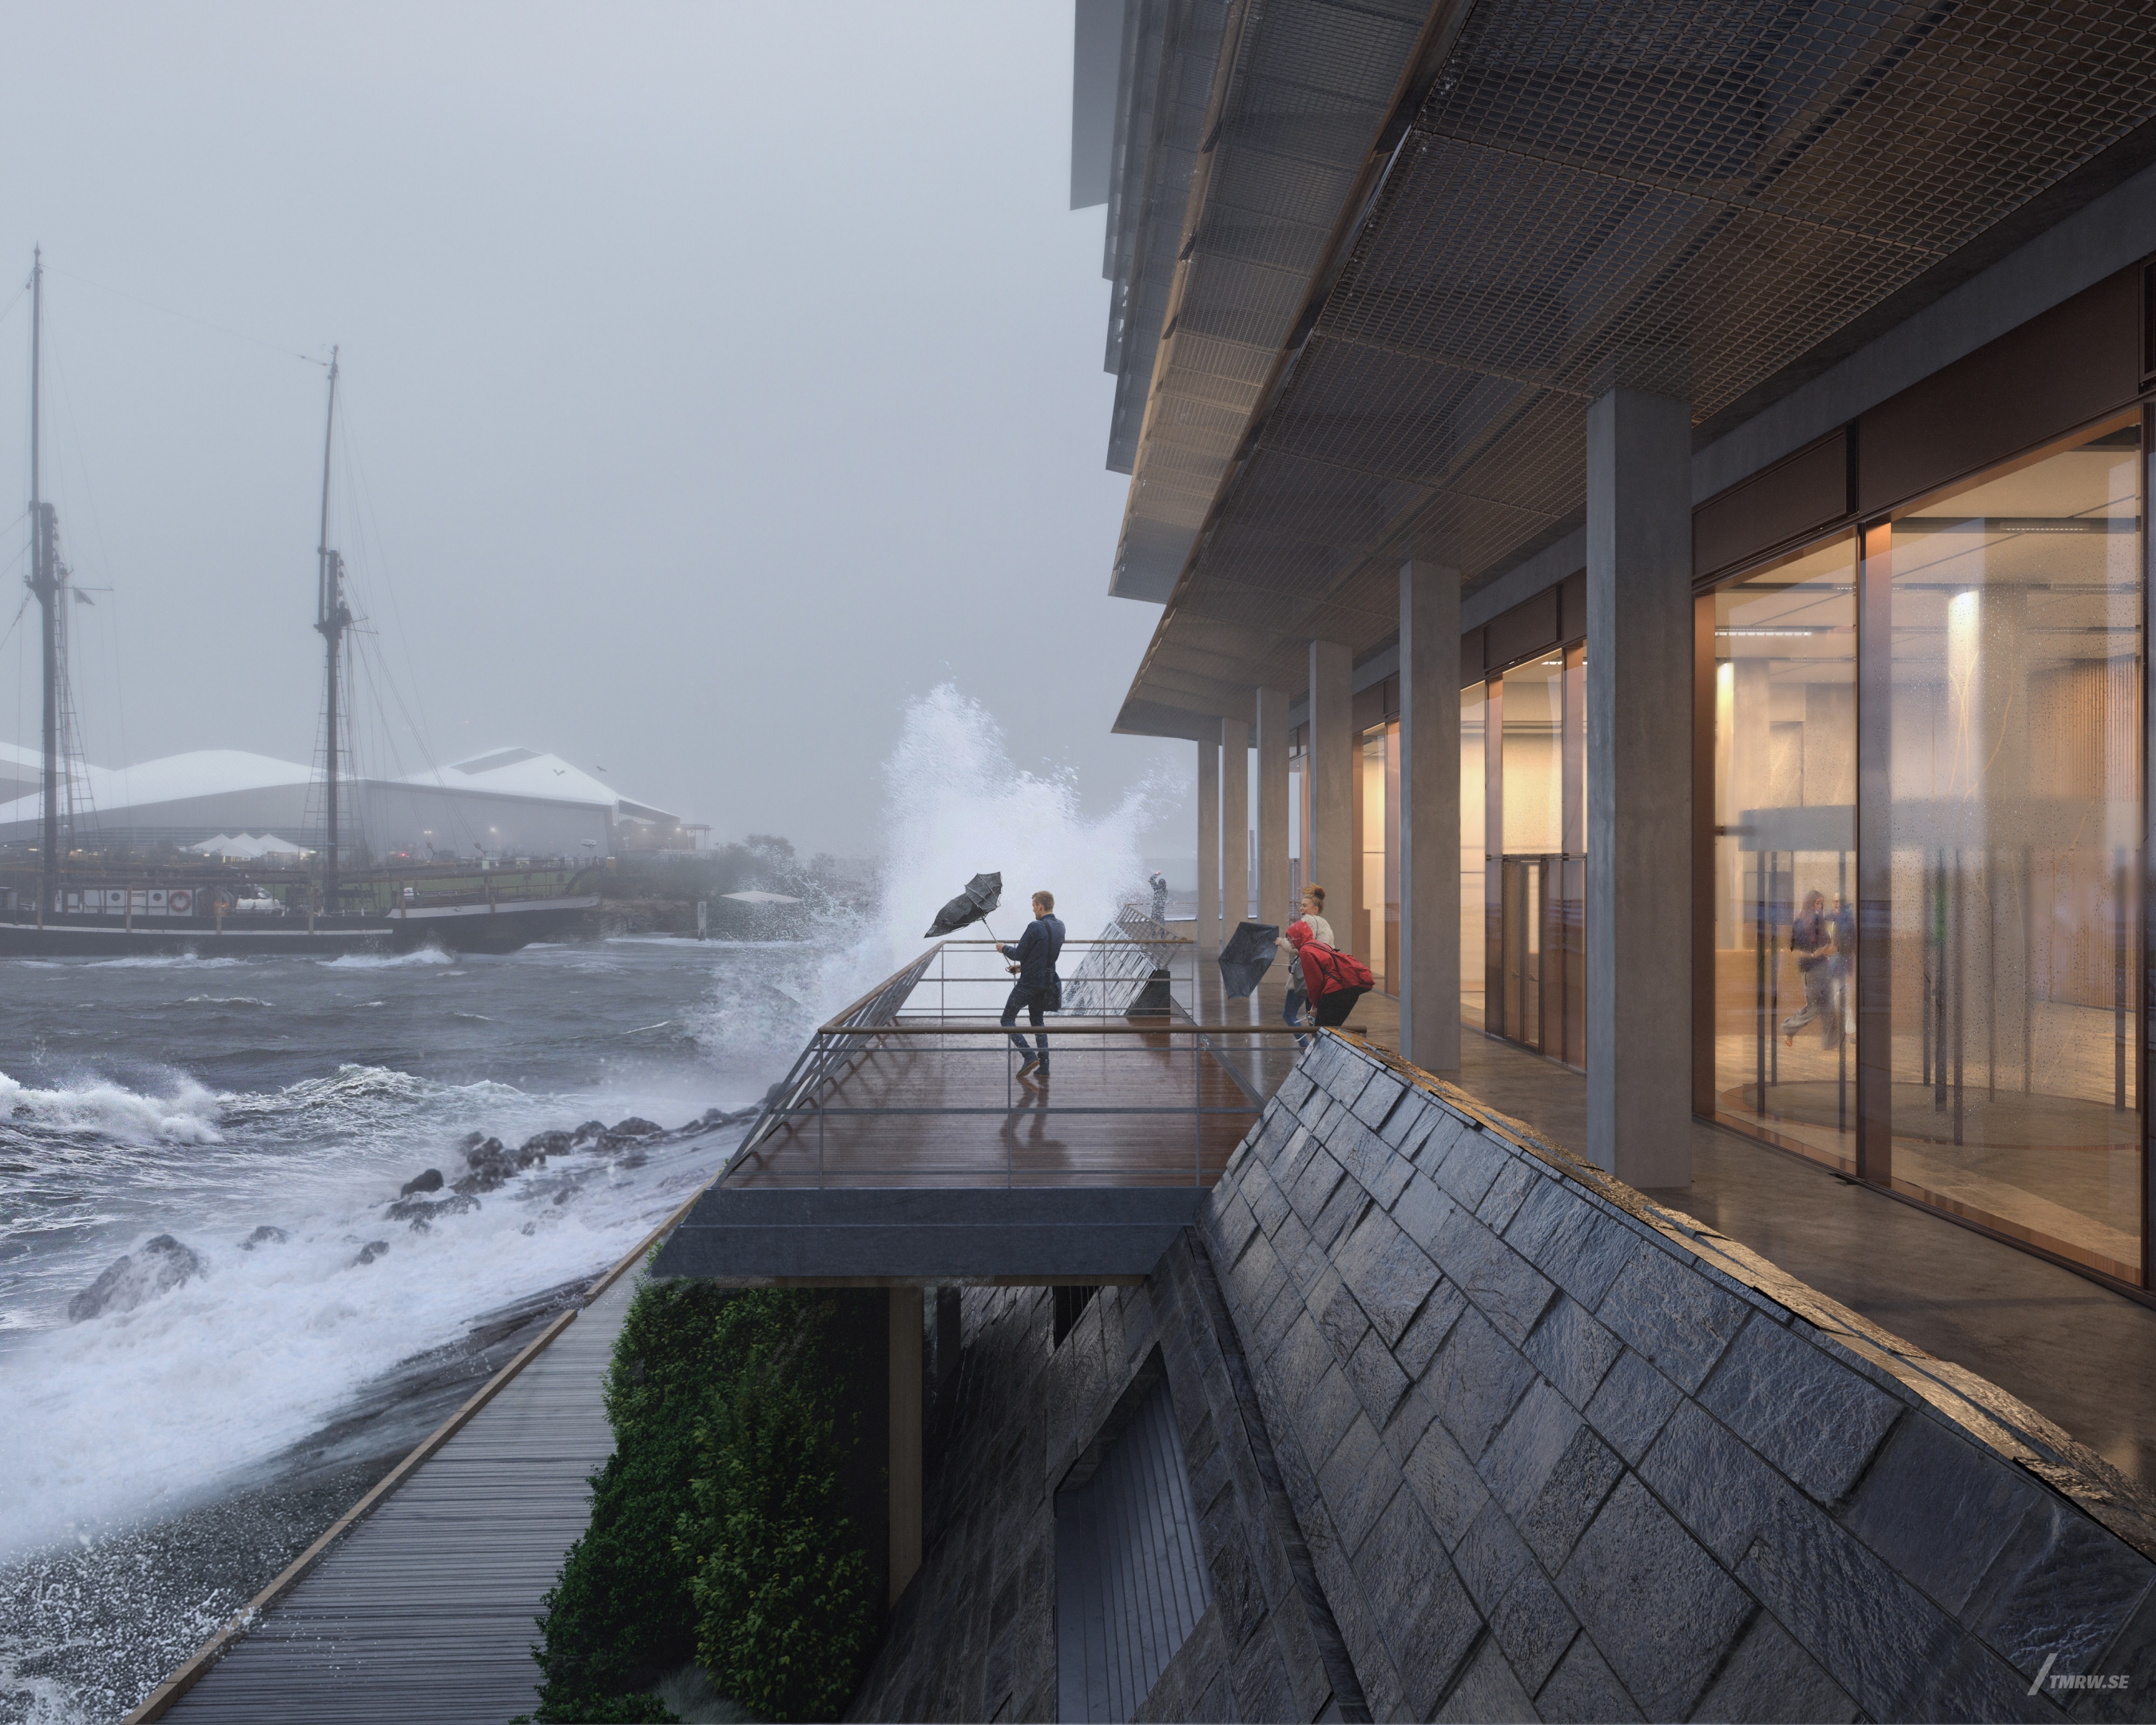 Architectural visualization of Ferring for Foster & Partners. A image of the exterior of a office building ocean view in daylight.